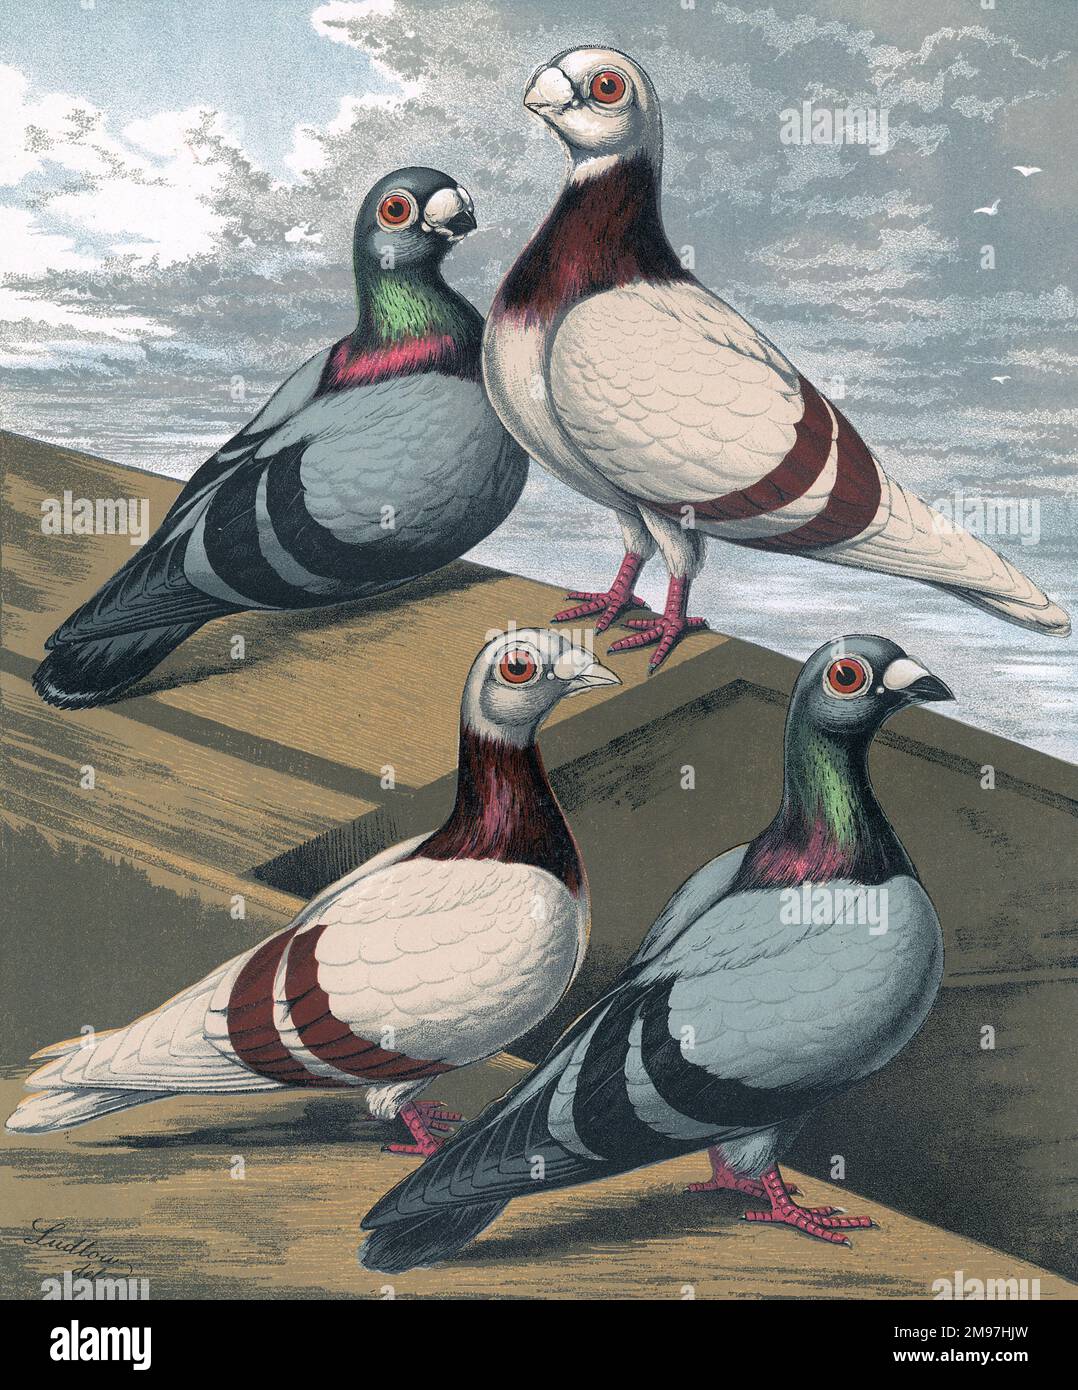 A portrait of two Short-Faced and two Long-Faced Antwerps which are a breed of fancy pigeon. The illustration presents their distinctive colouration and markings, such as their subtle coloured neck blends, and their two-bar markings on their wings. Stock Photo